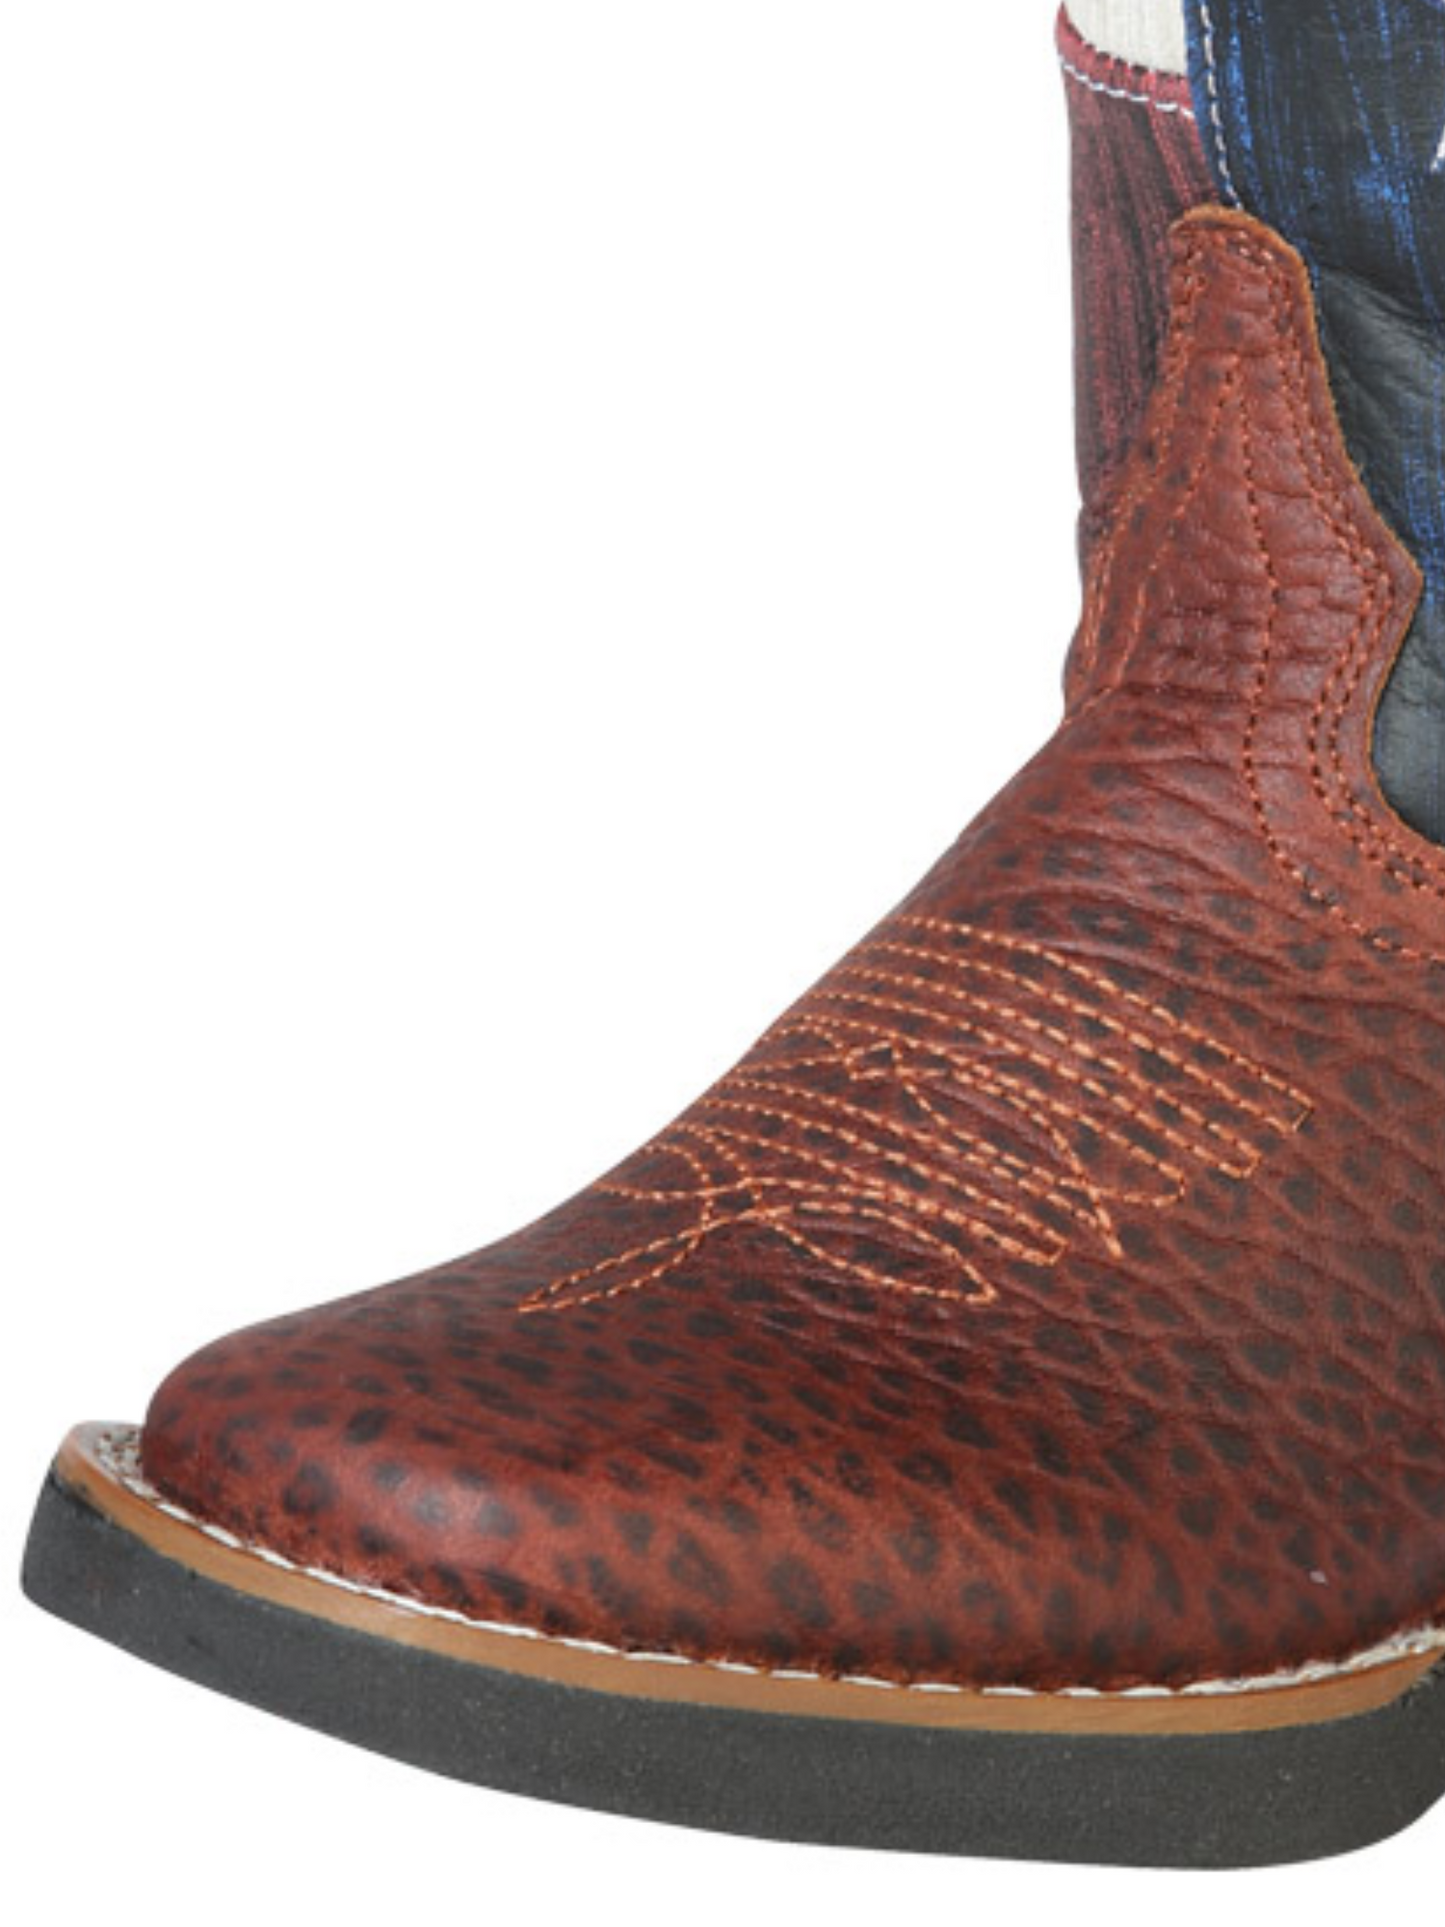 Kids - Classic Genuine Leather Rodeo Cowboy Boots for Children 'Jar Boots' - ID: 126592